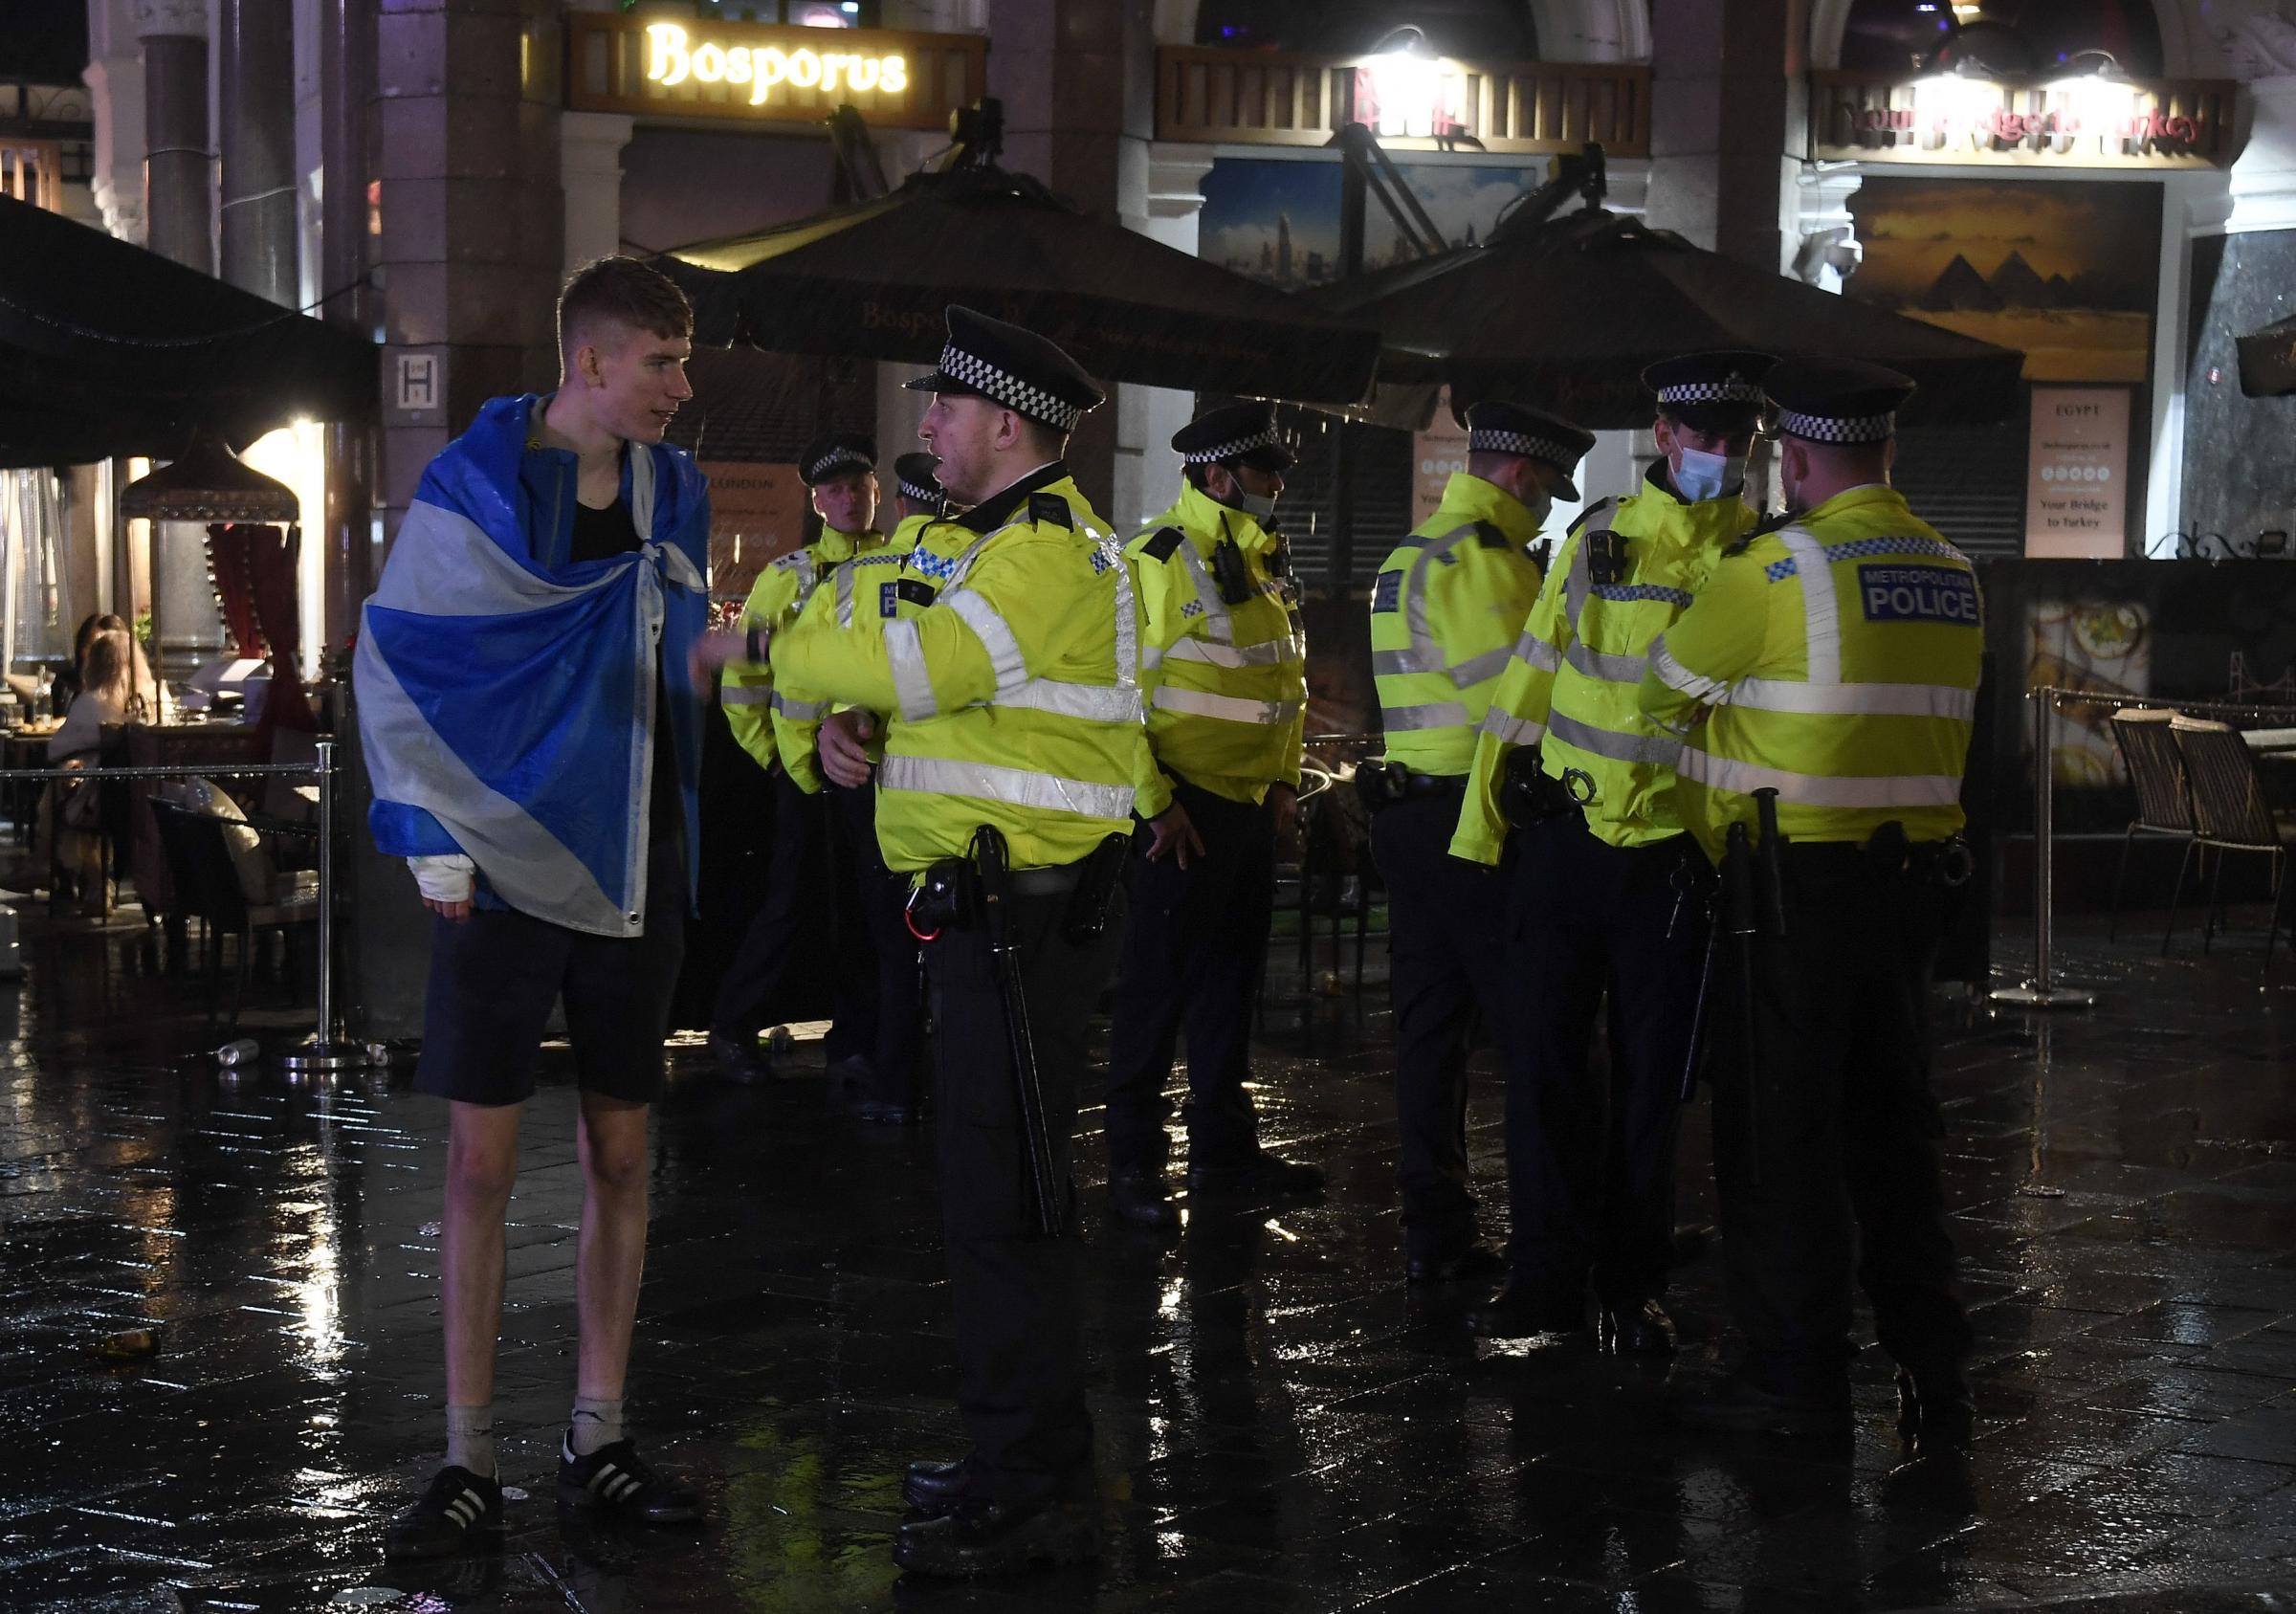 A Scotland supporter speaks to a police officer in Leicester Square in London, Friday, June 18, 2021 after the Euro 2020 soccer championship group D match between England and Scotland at Wembley Stadium. The match ended in a 0-0 draw.(AP Photo/Alberto